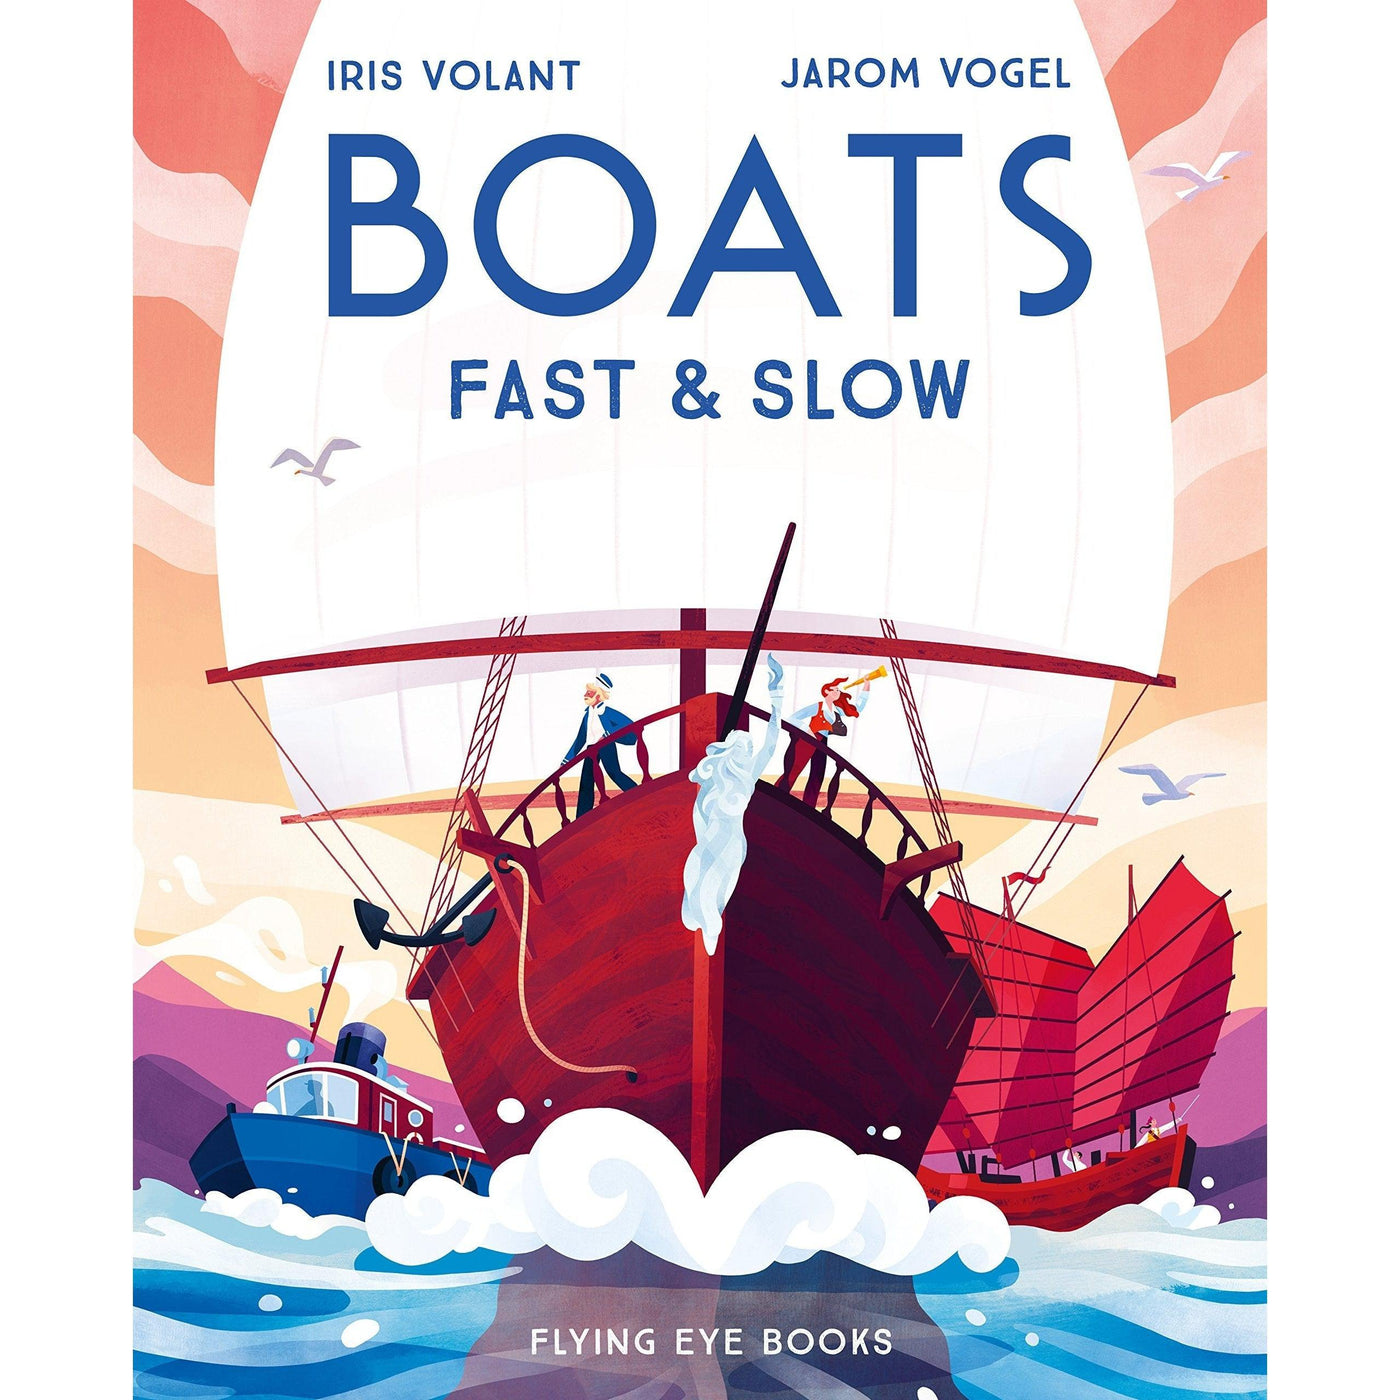 Boats: Fast & Slow: - Iris Volant And Jarom Vogel